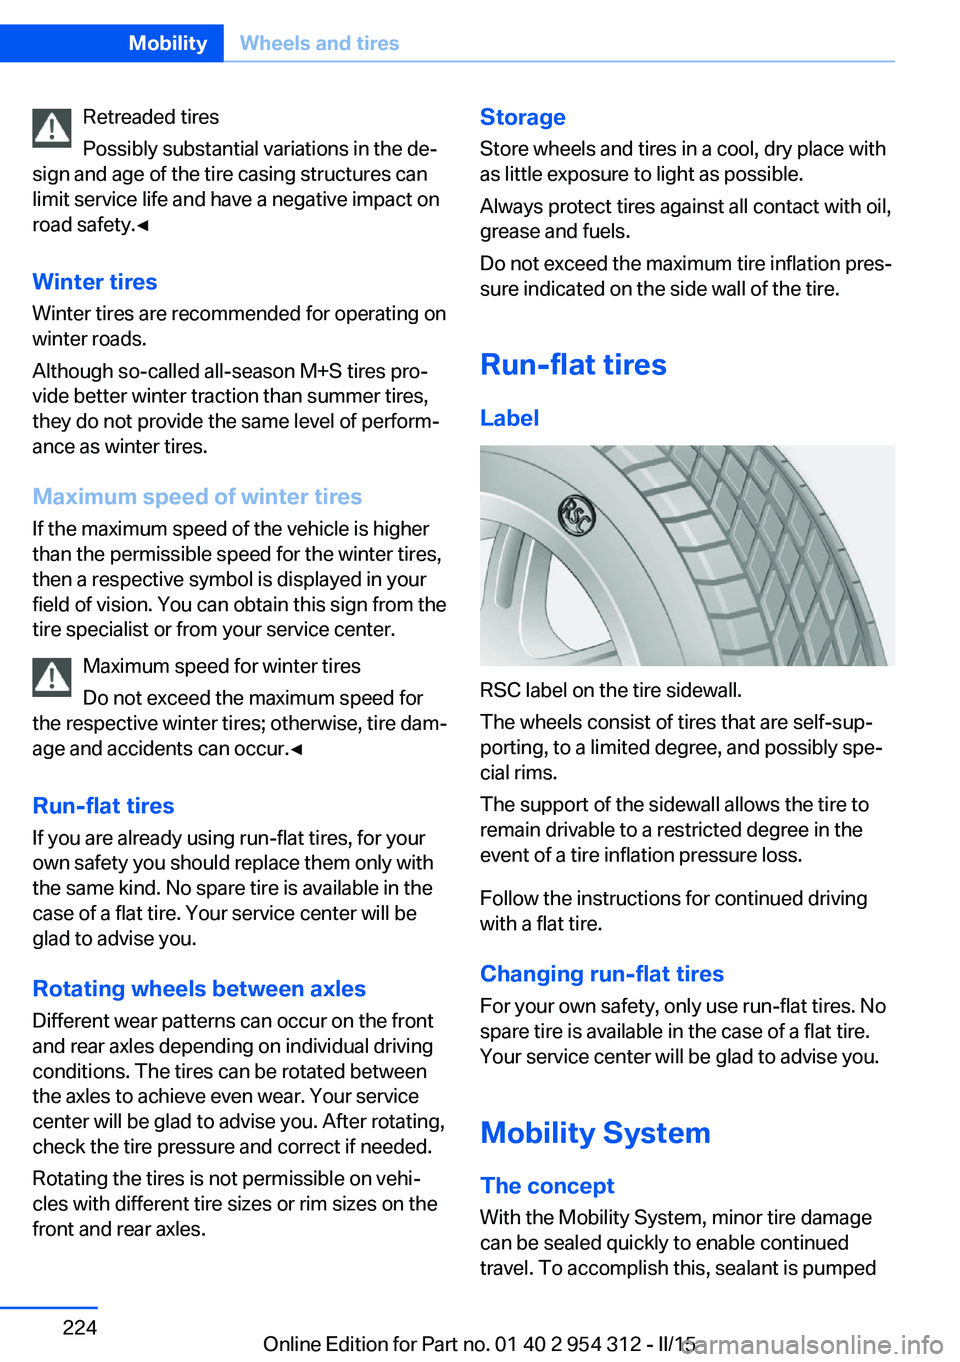 BMW 535D XDRIVE SEDAN 2016  Owners Manual Retreaded tires
Possibly substantial variations in the de‐
sign and age of the tire casing structures can
limit service life and have a negative impact on
road safety.◀
Winter tires
Winter tires a